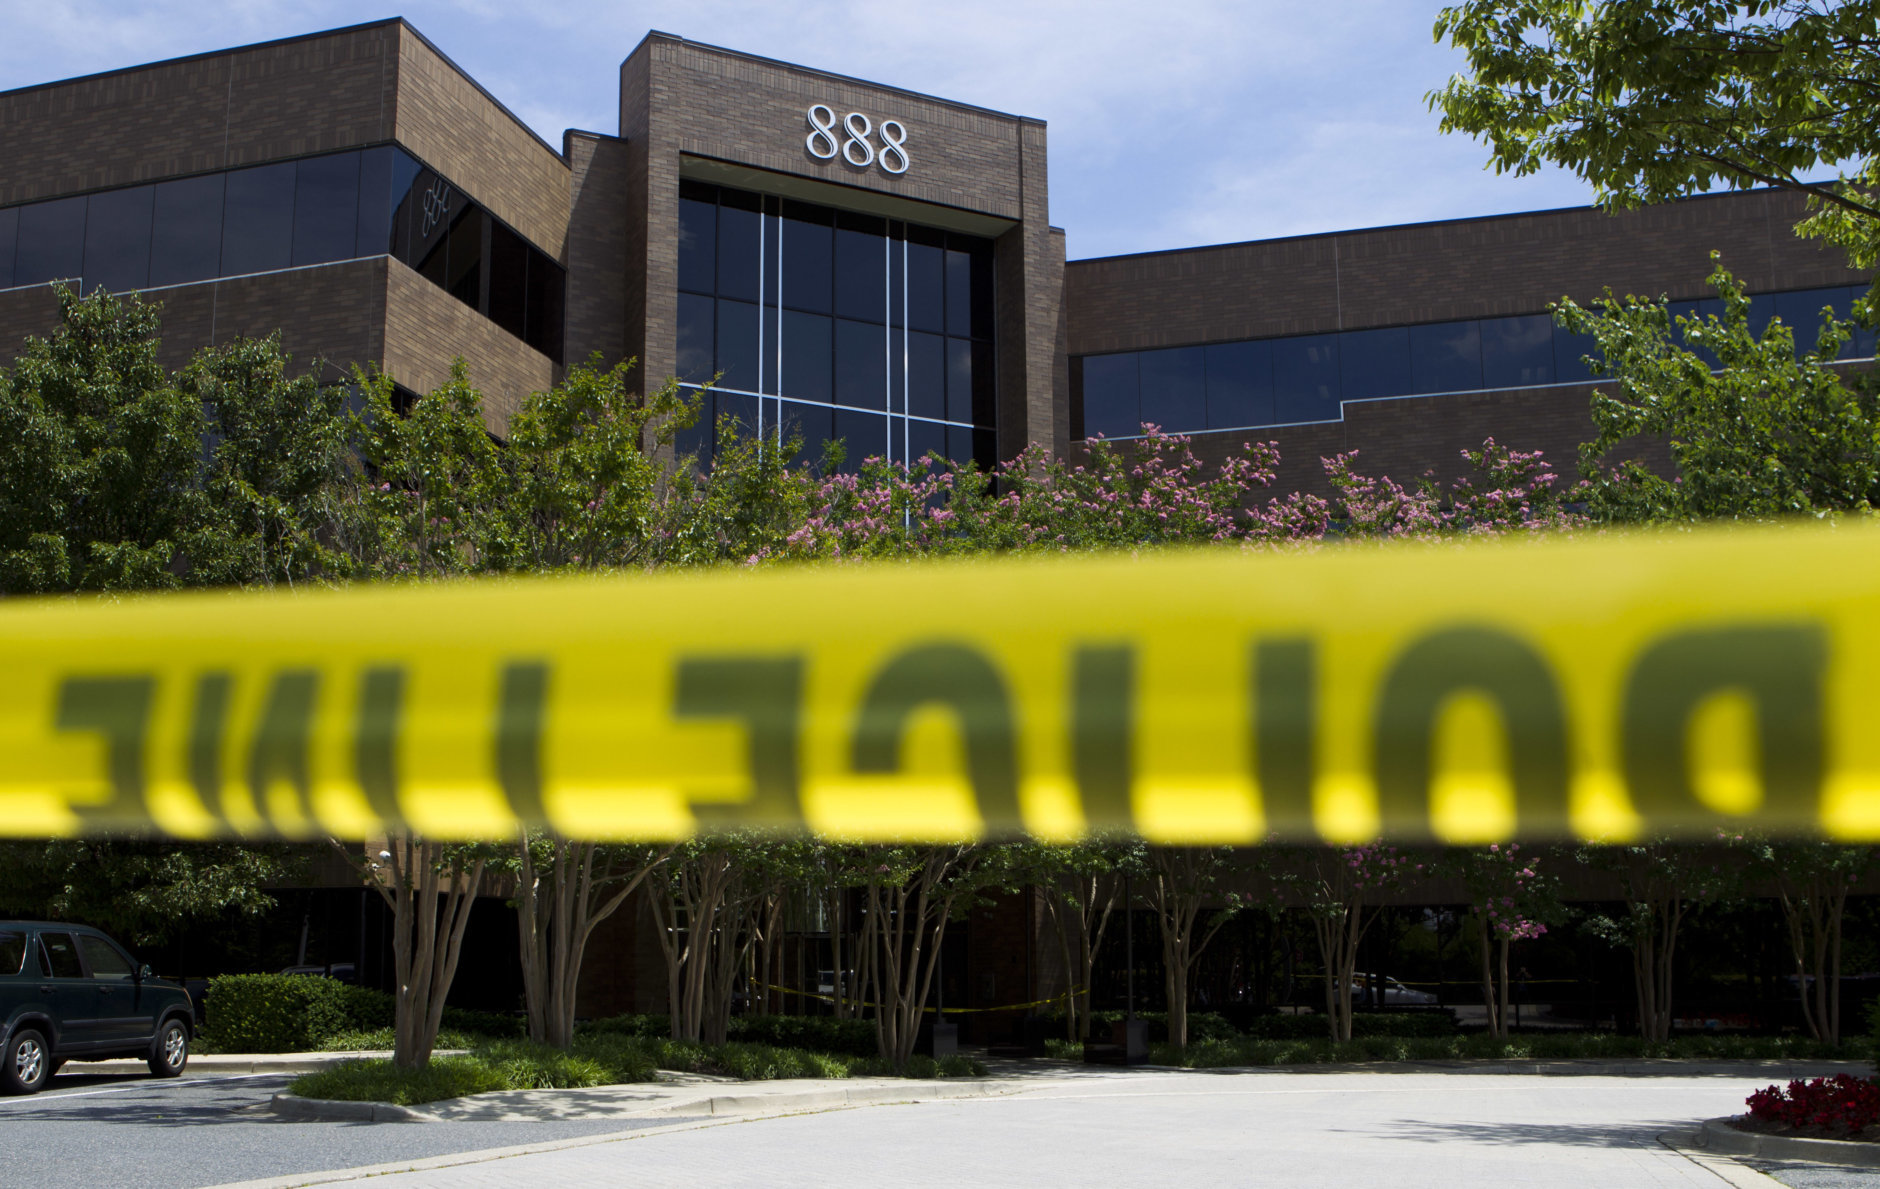 Police tape surrounds the front entrance of the office building housing The Capital Gazette newspaper in Annapolis, Md., on Friday, June 29, 2018. A man armed with smoke grenades and a shotgun attacked journalists in the building Thursday, killing several people before police quickly stormed the building and arrested him, police and witnesses said. (AP Photo/Jose Luis Magana)